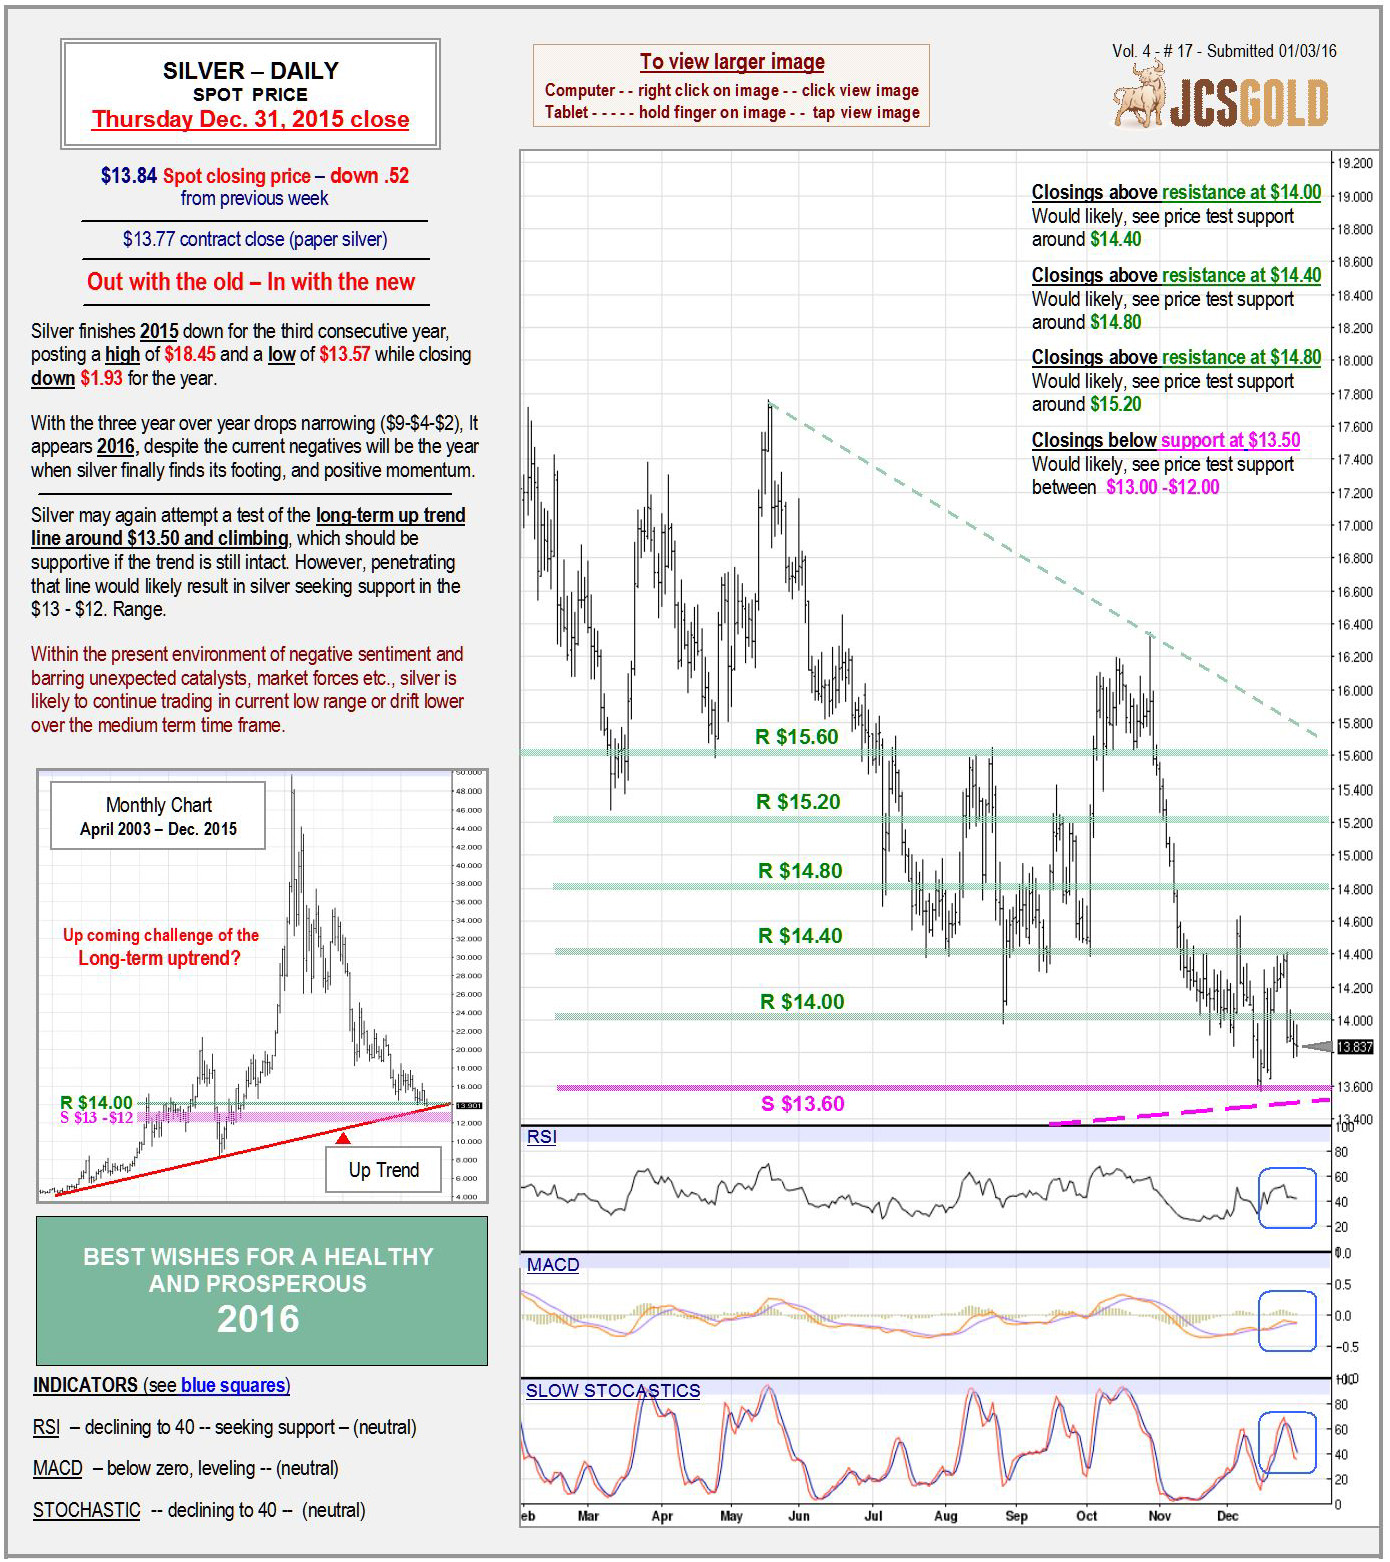 Jan 1, 2016 chart & commentary